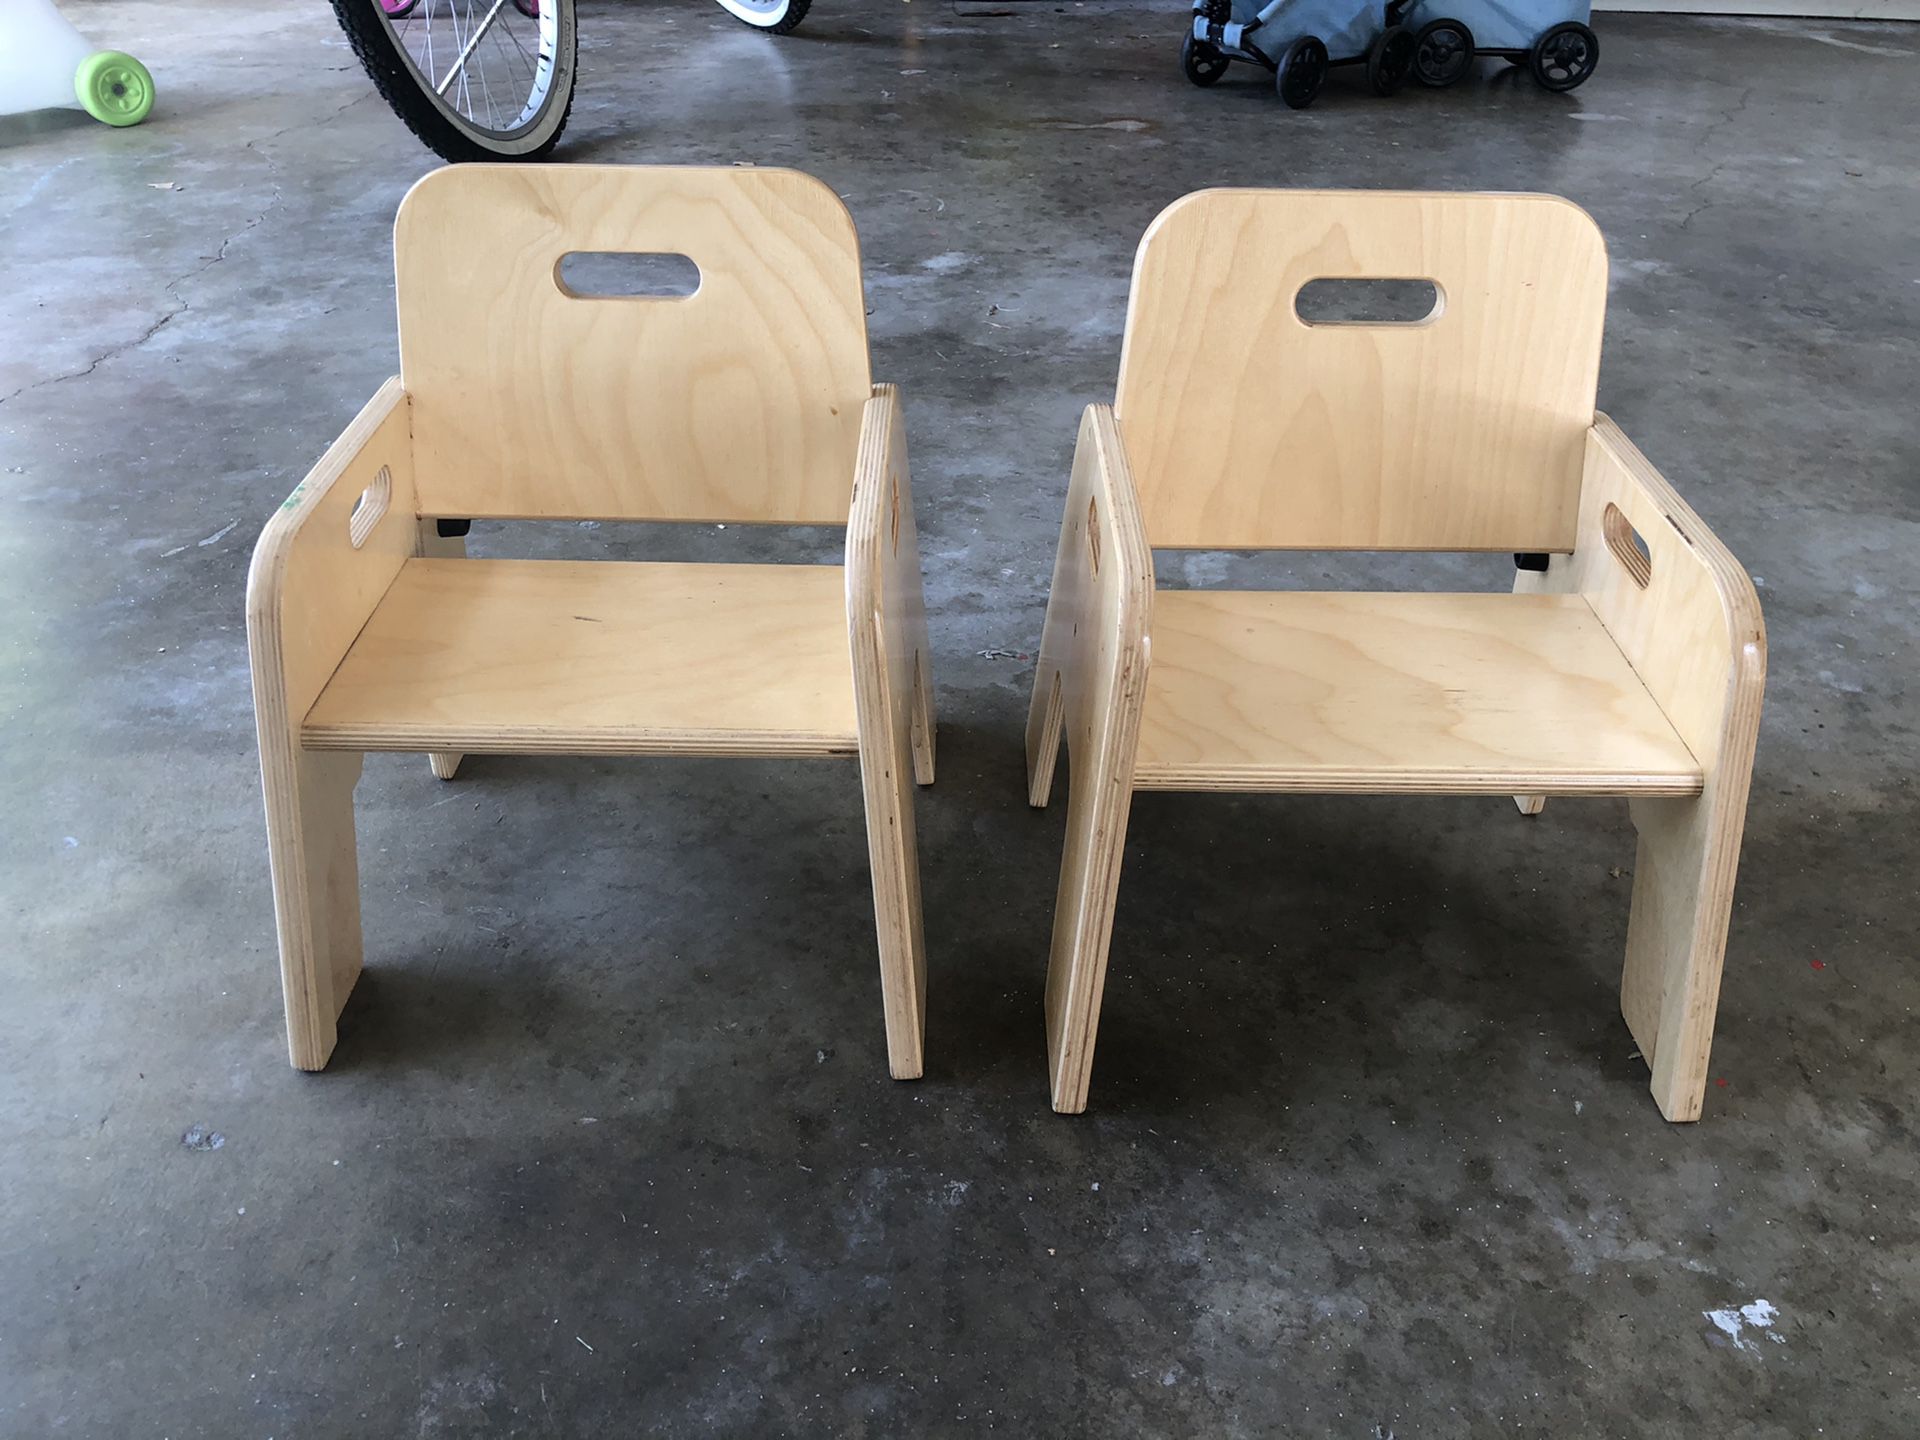 Lakeshore wooden toddler chairs